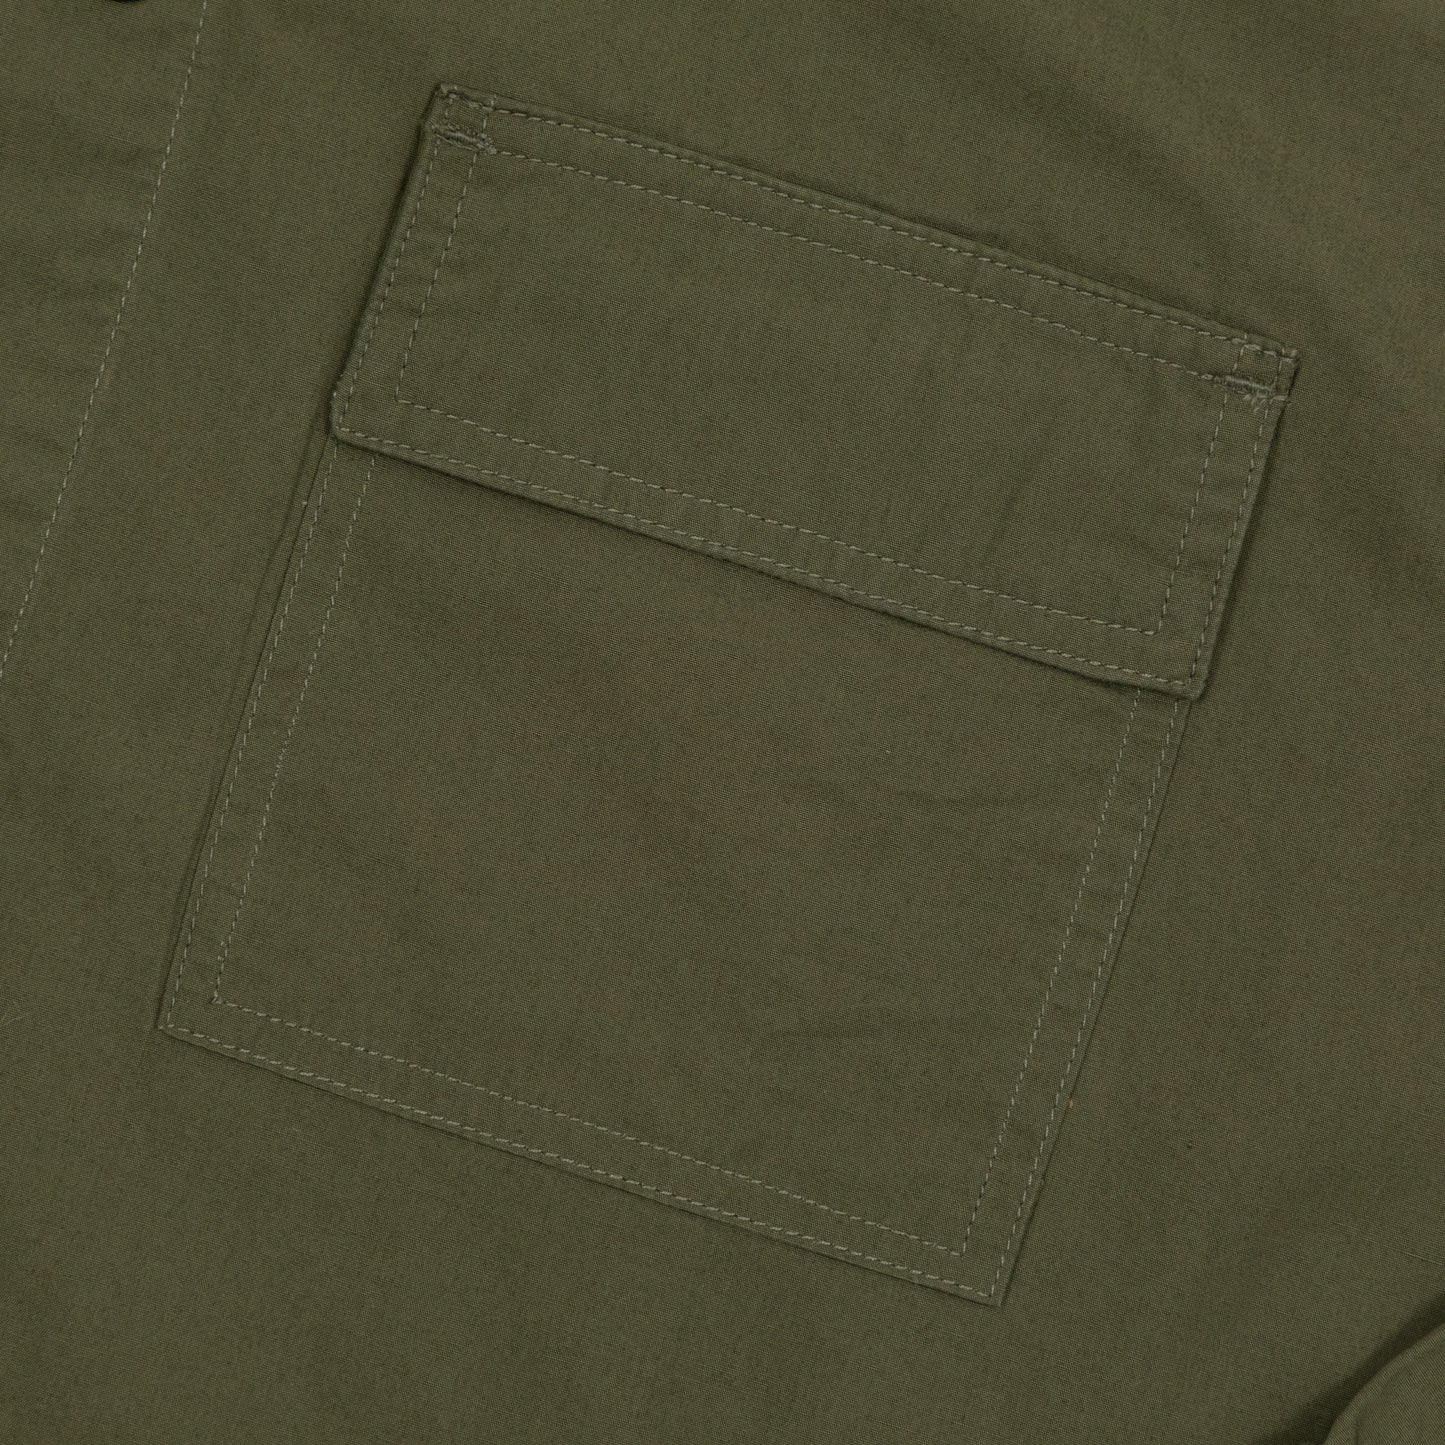 USKEES Lightweight Organic Cotton Overshirt in OLIVE GREEN